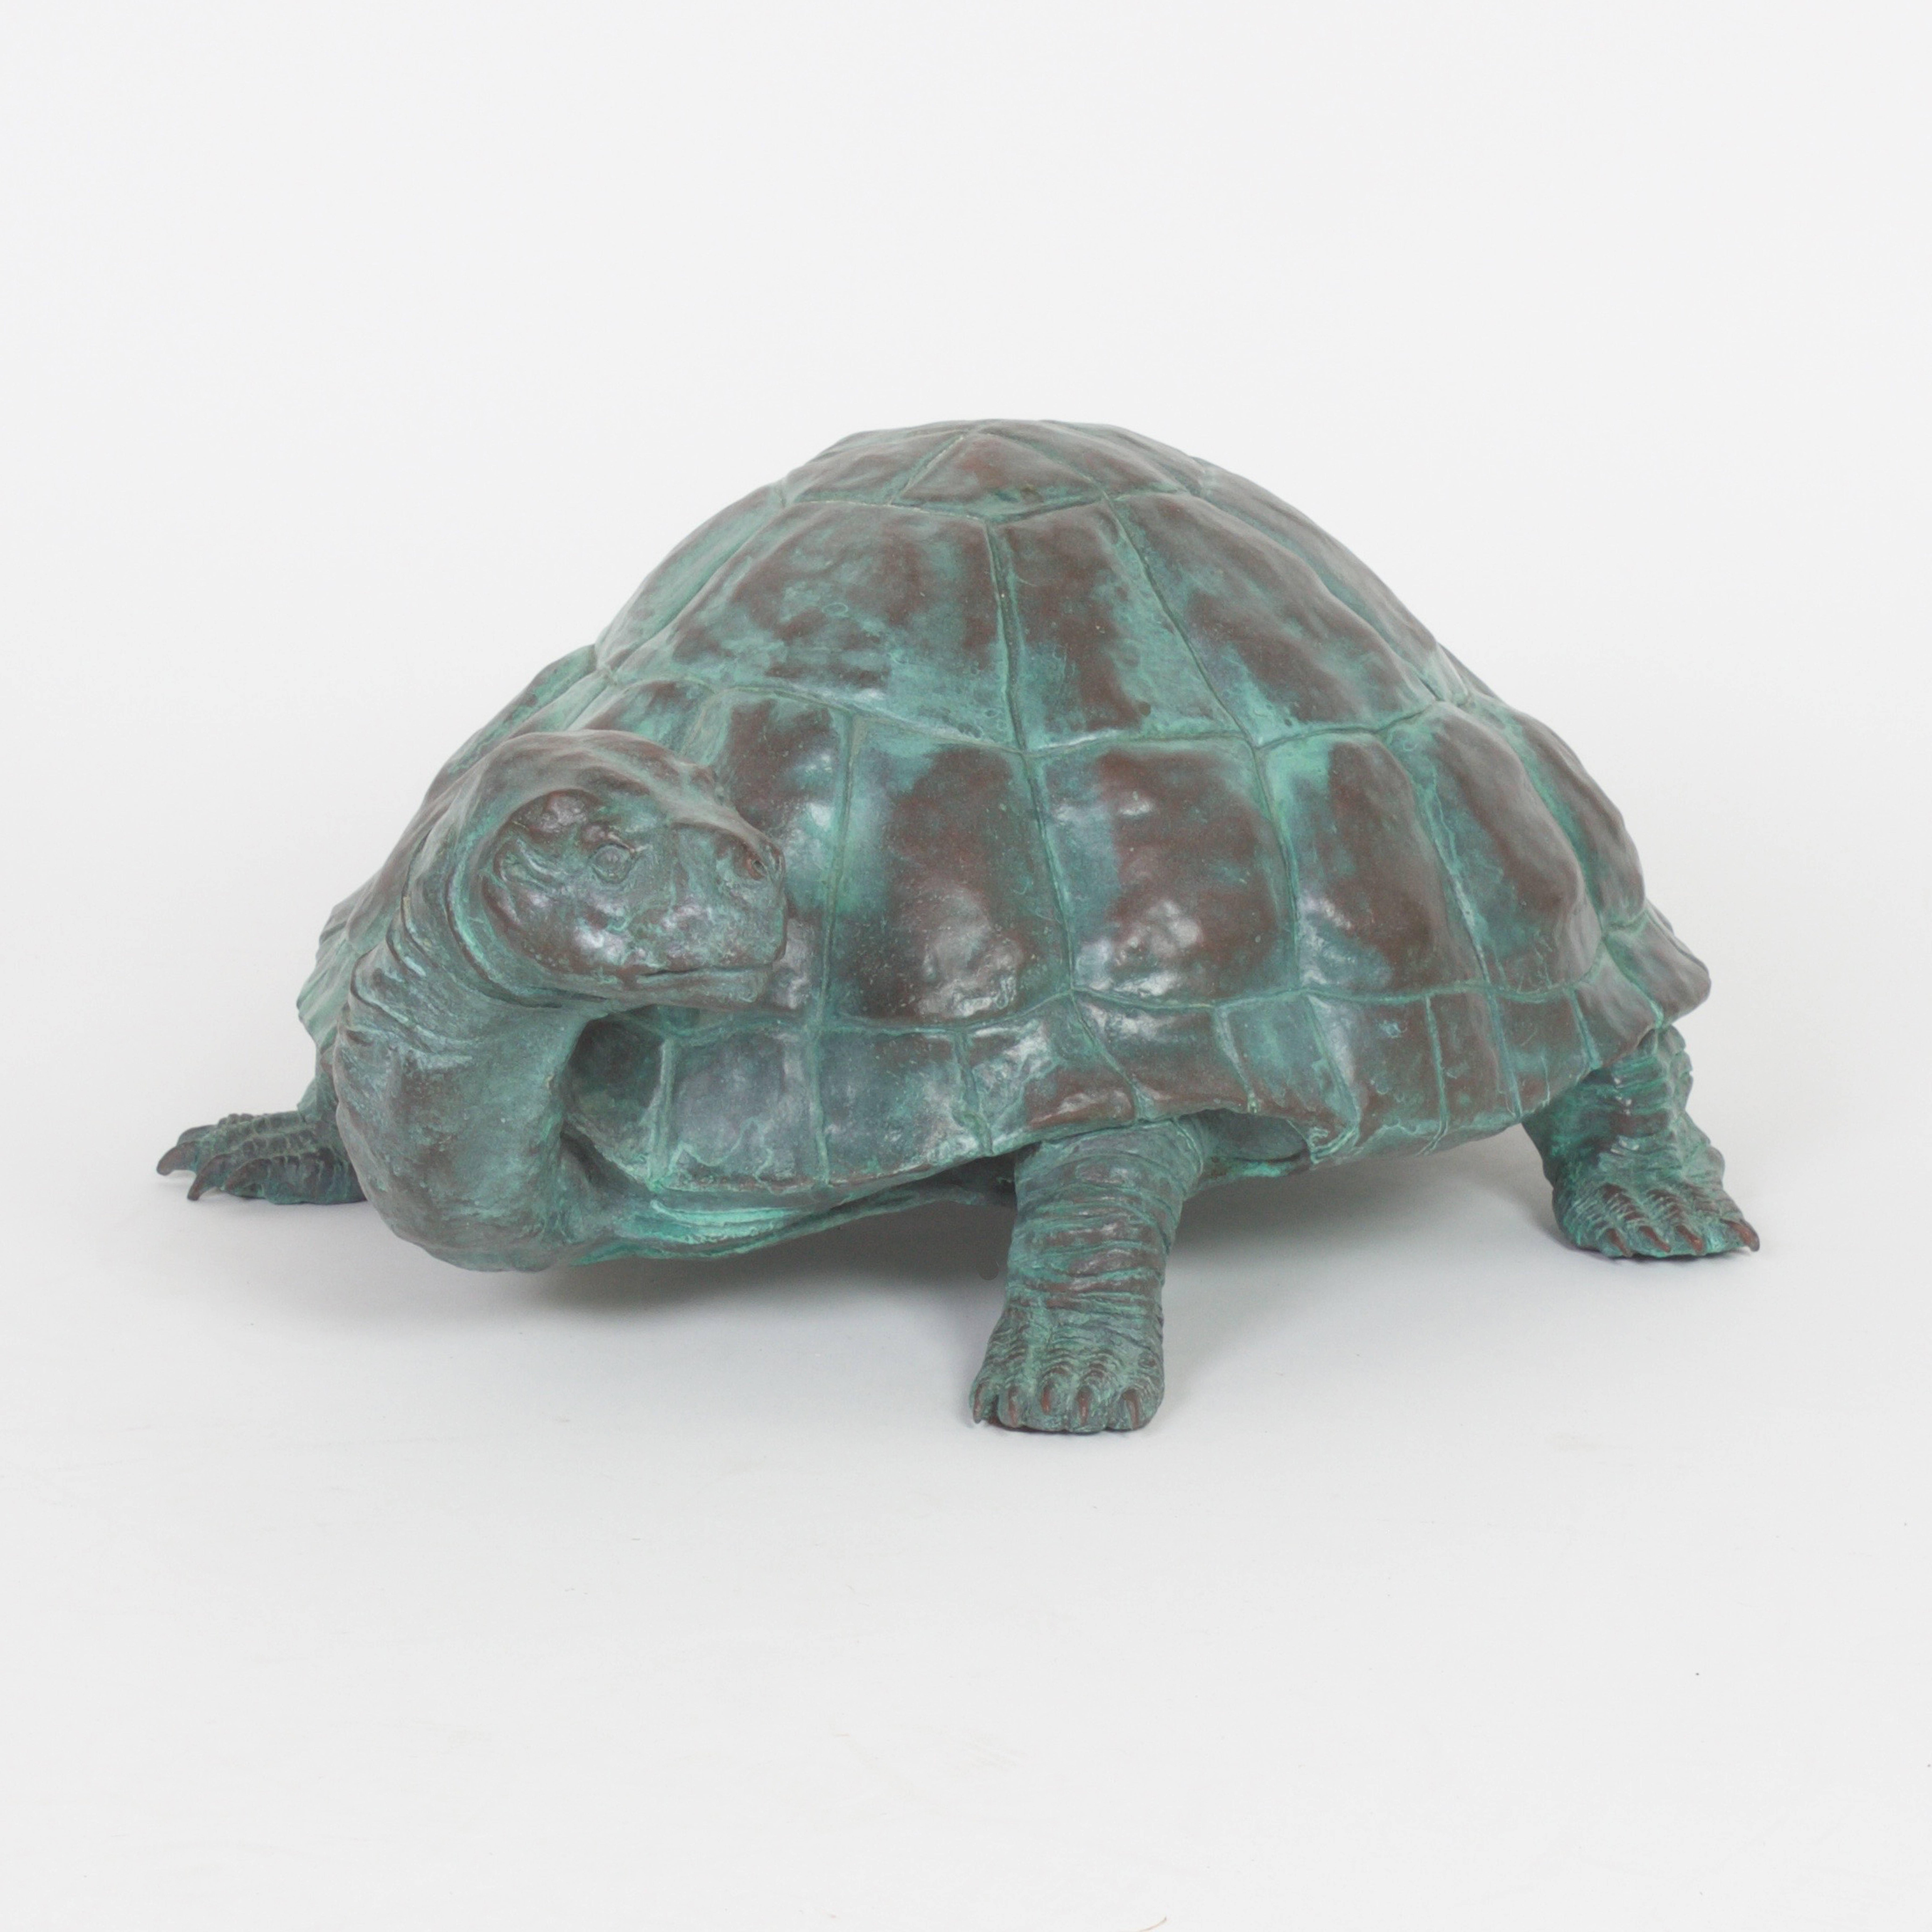 Limited edition Frank Fleming bronze turtle or tortoise expertly crafted with a life like expression and having a rich verdigris patina. Signed and numbered on the bottom 